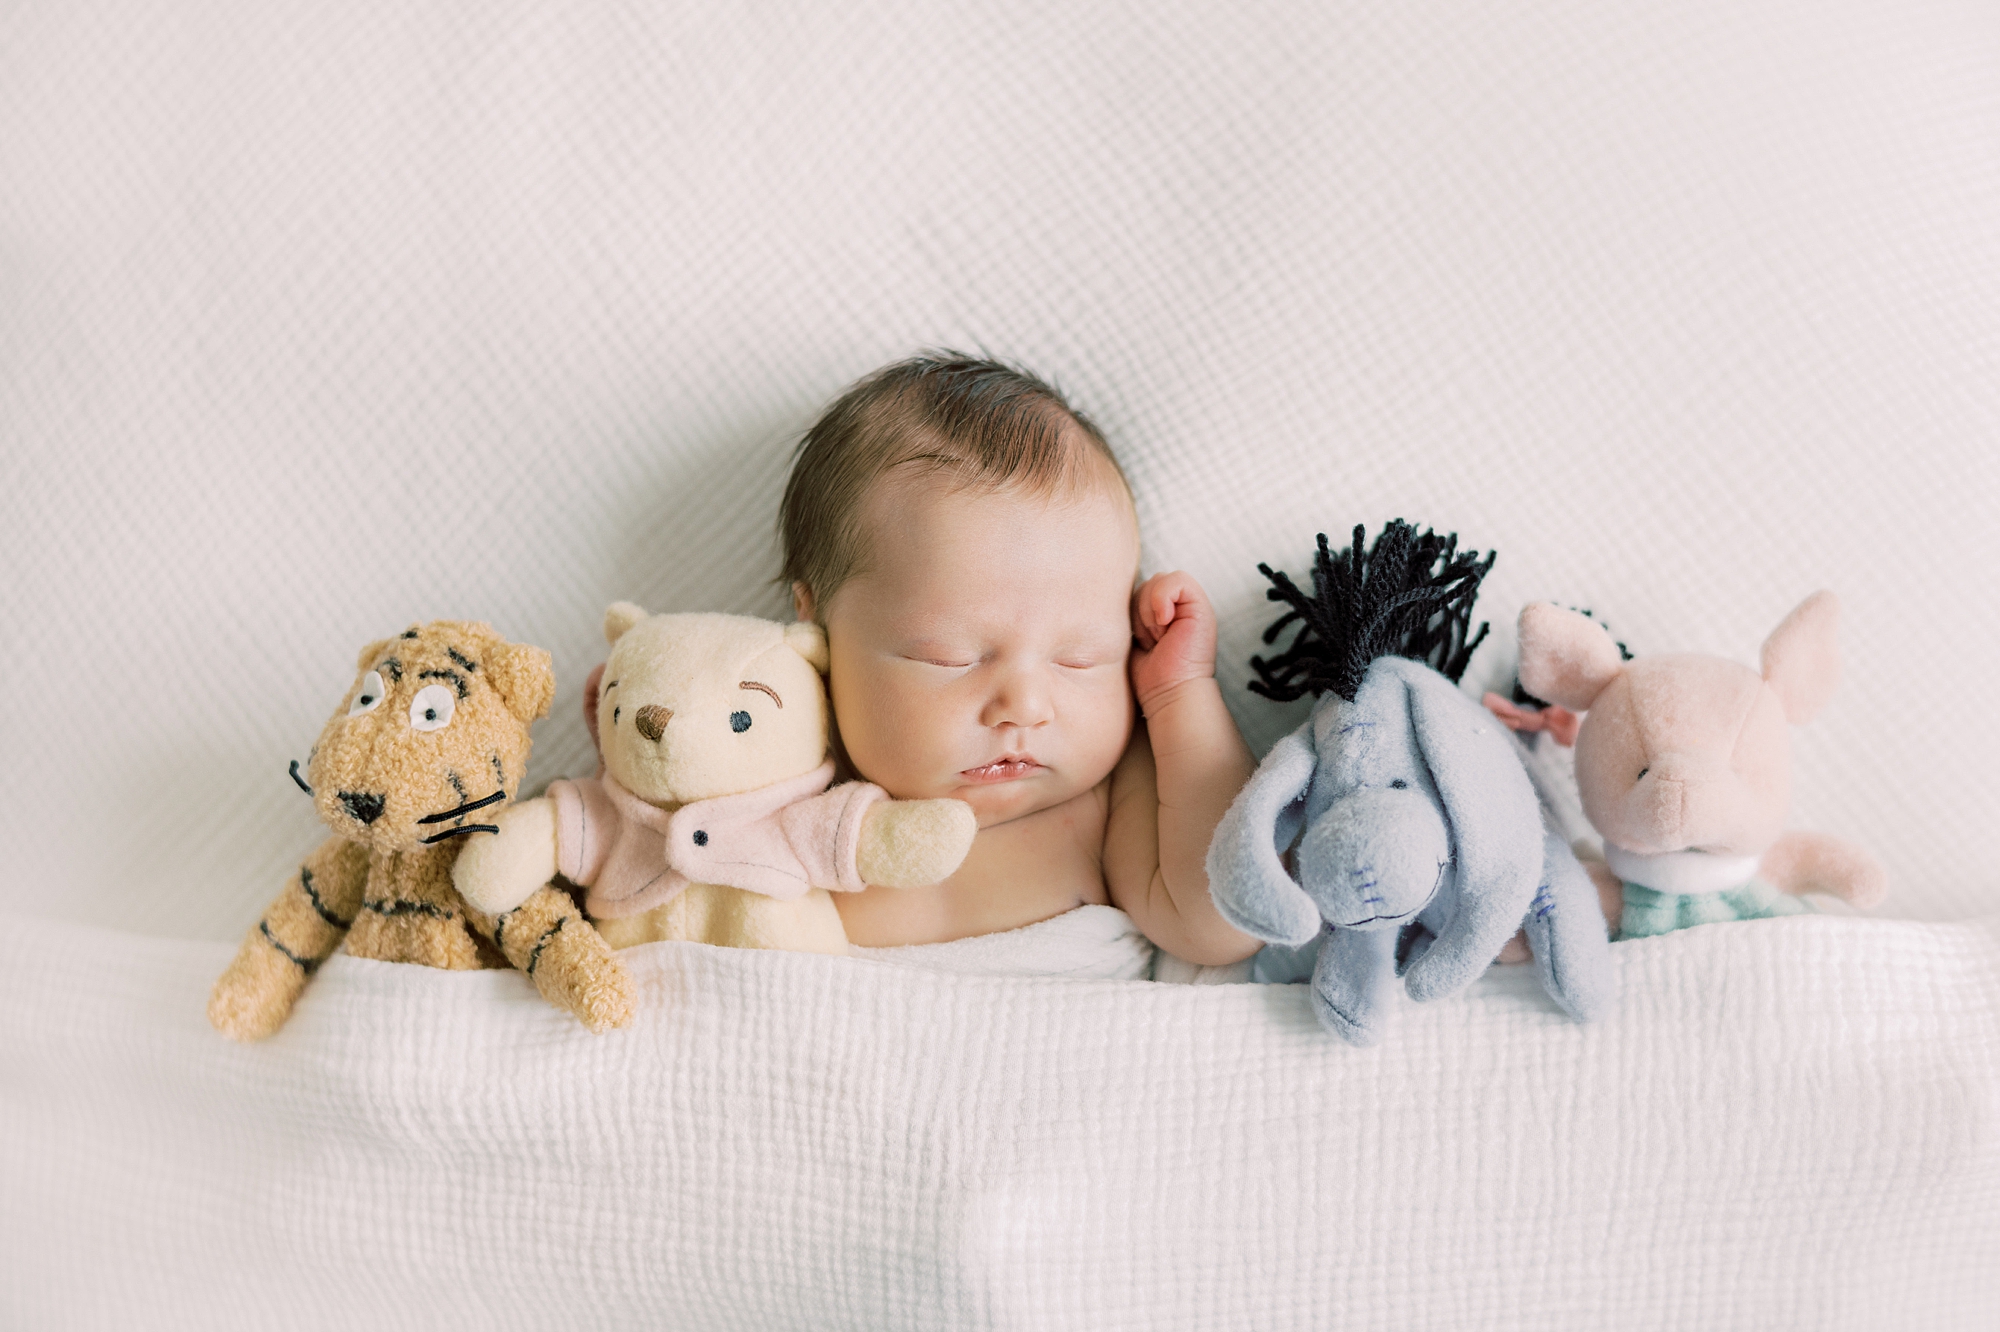 baby lays with Winnie the Pooh stuffed animals